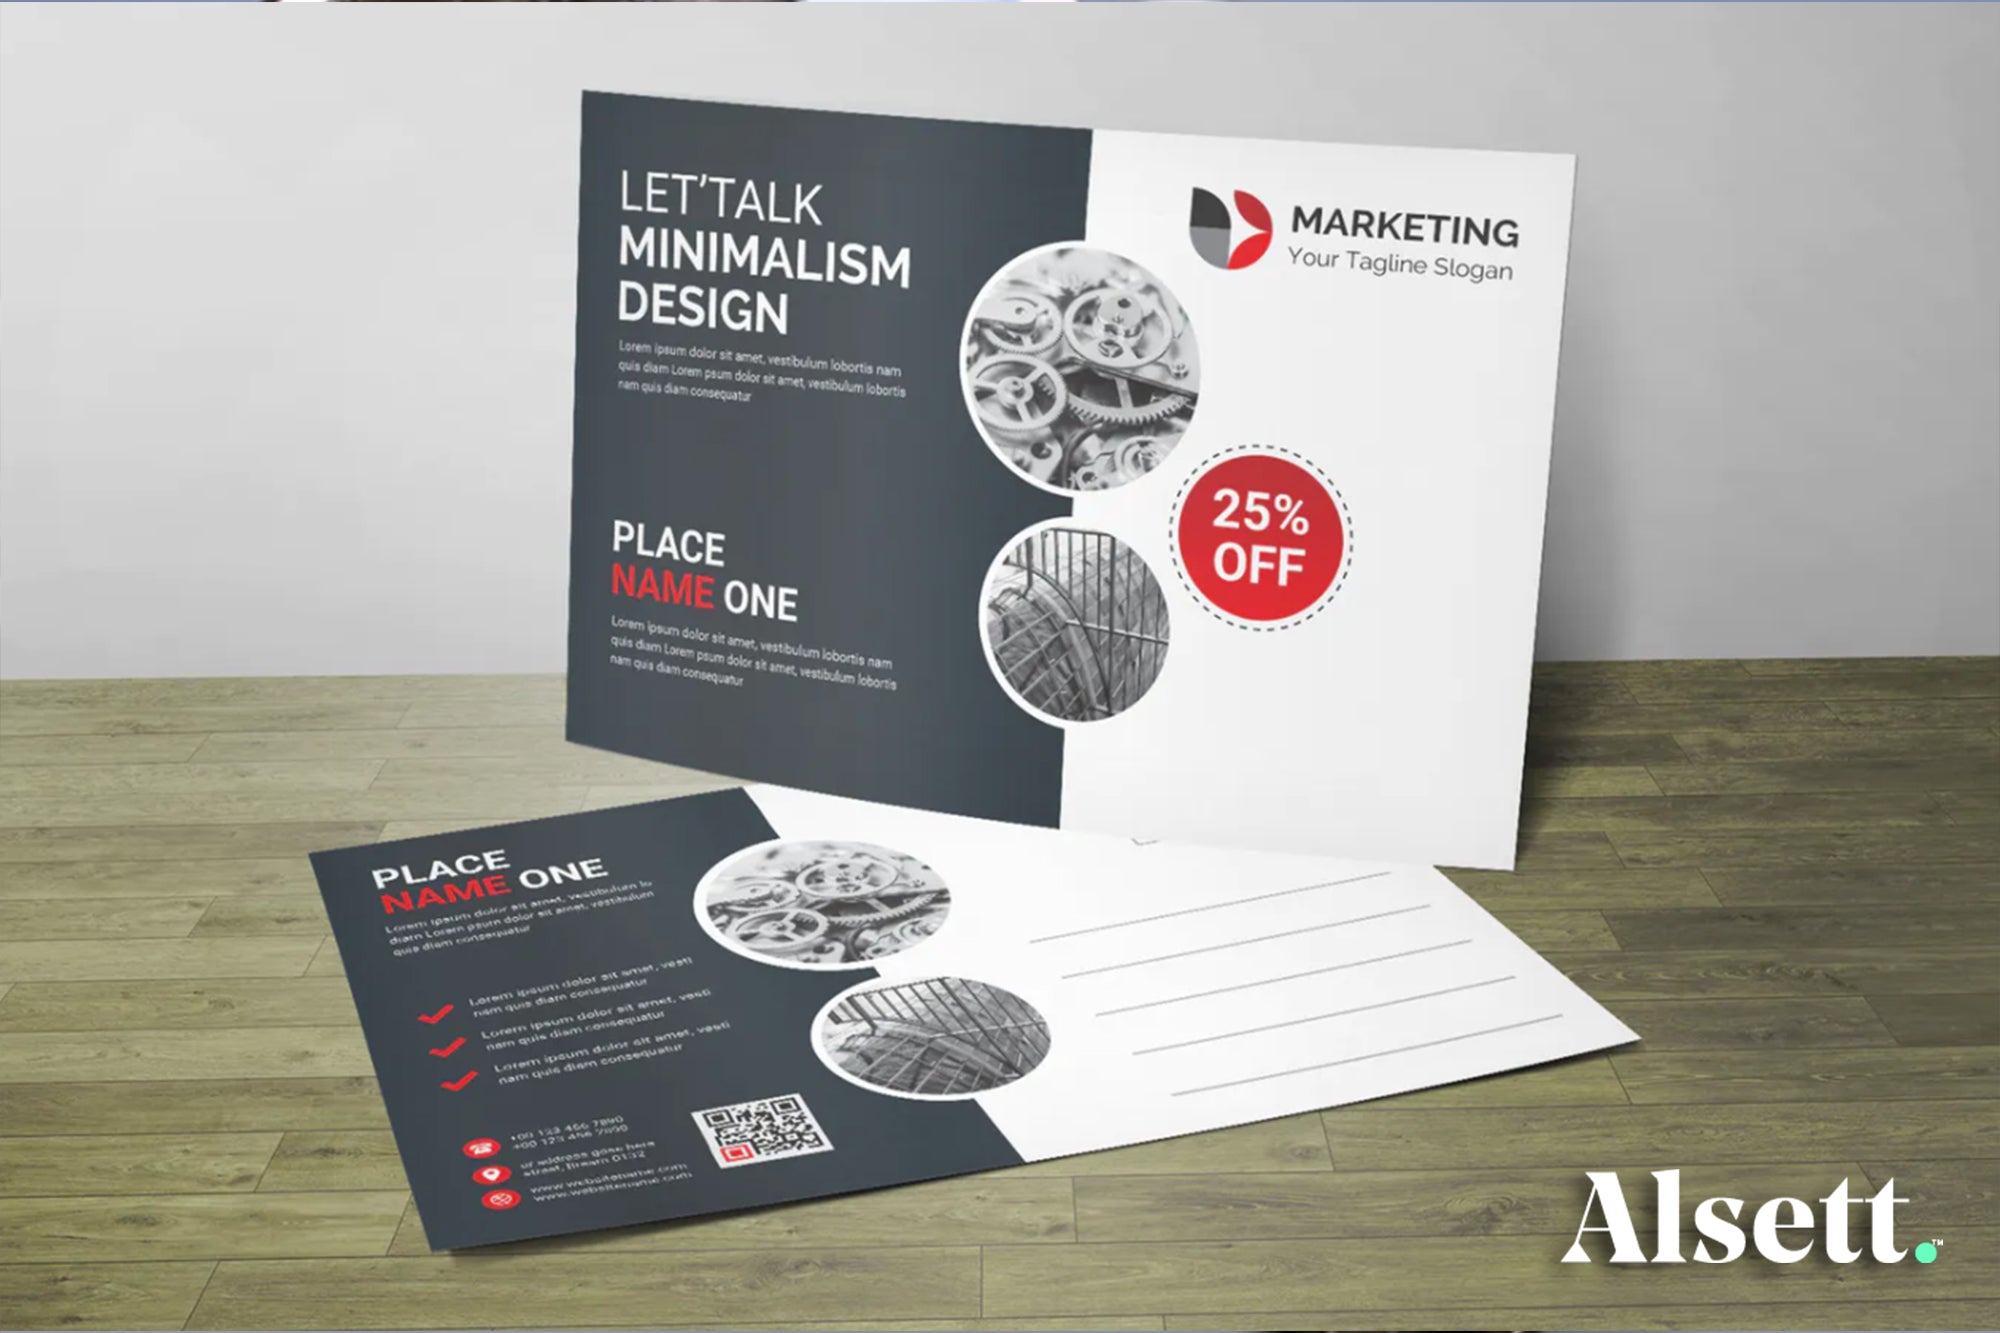 5 Hours Delivery - Booklets, Business Cards, Flyers and more - Alsett.com